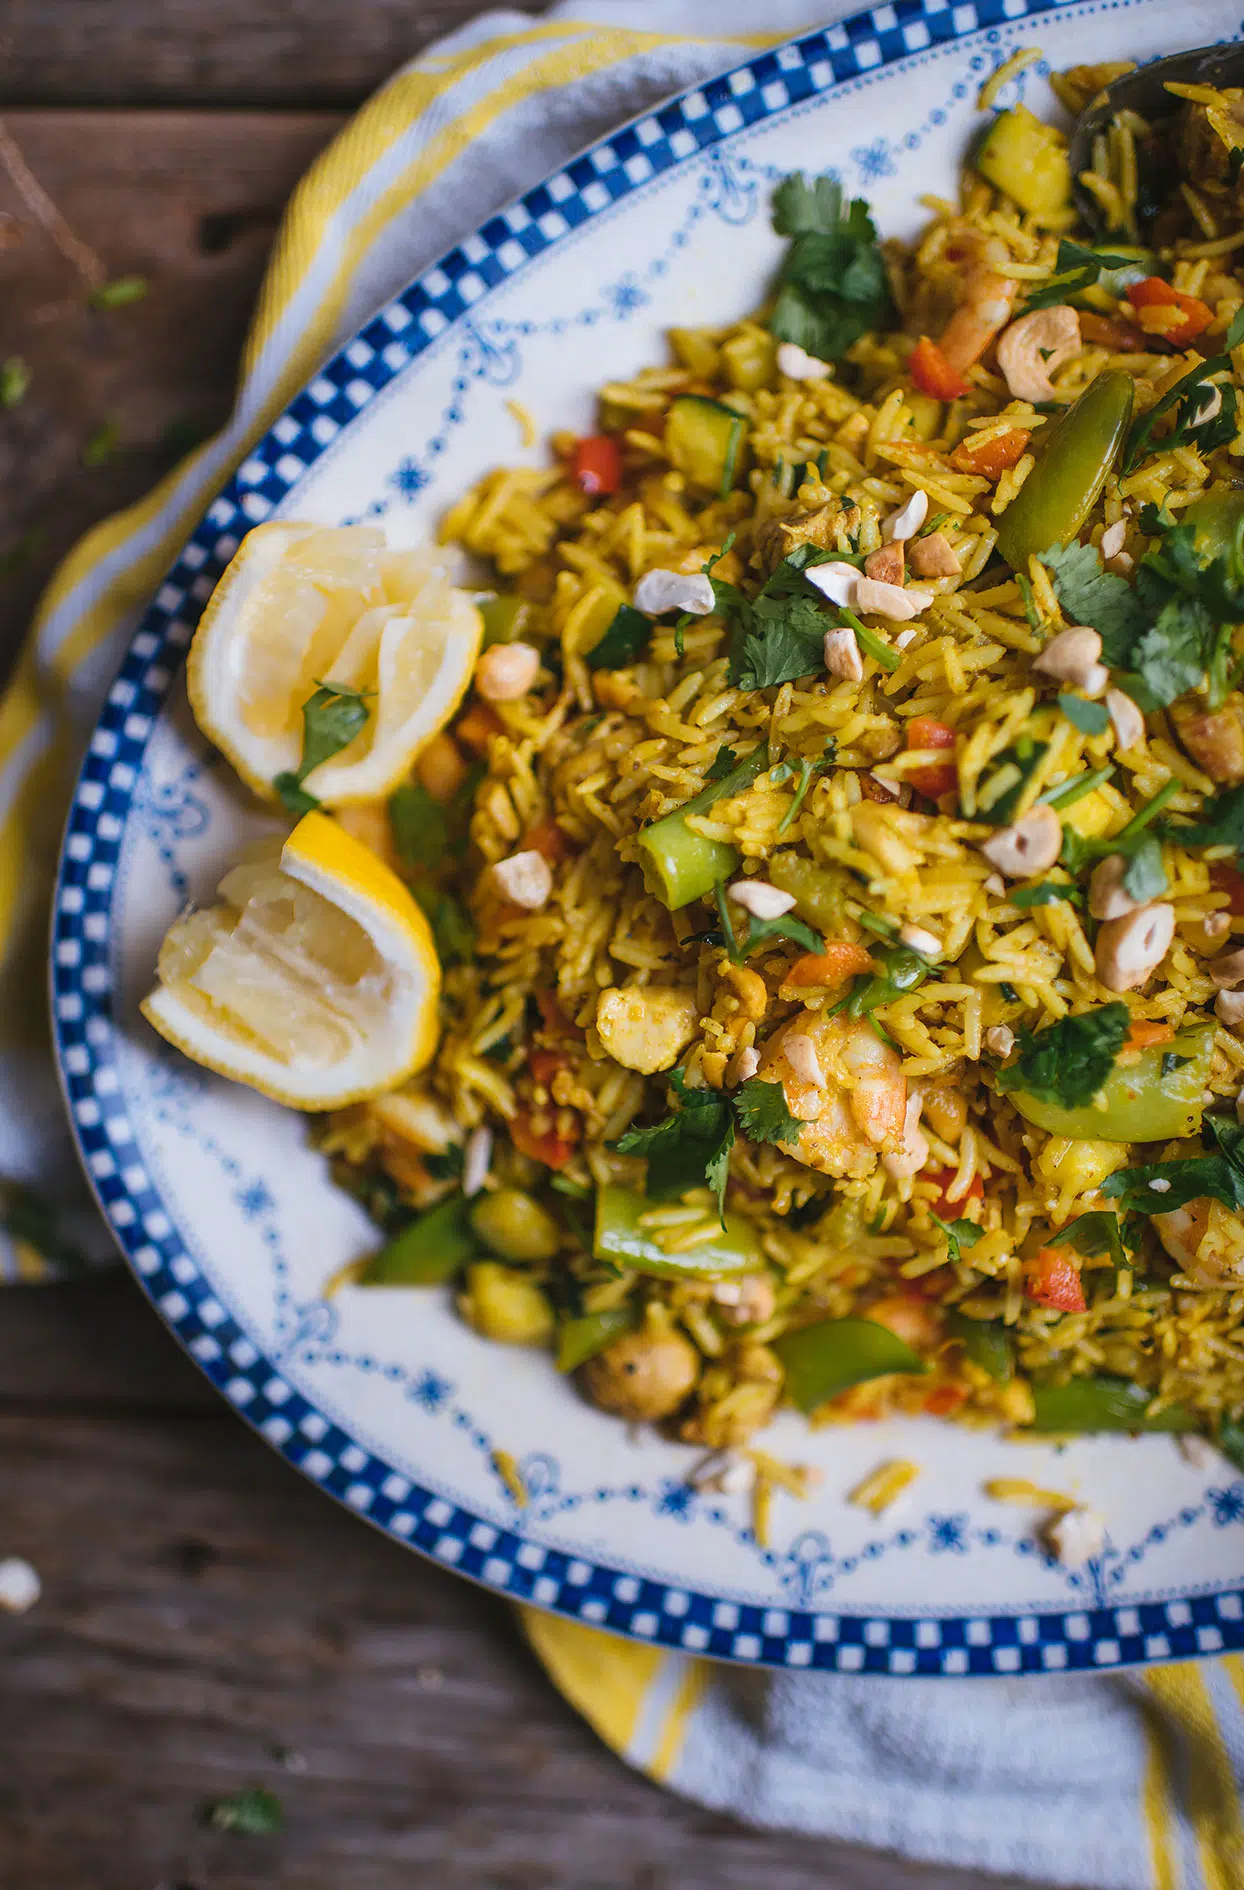 Curry rice with chicken, shrimp and vegetables